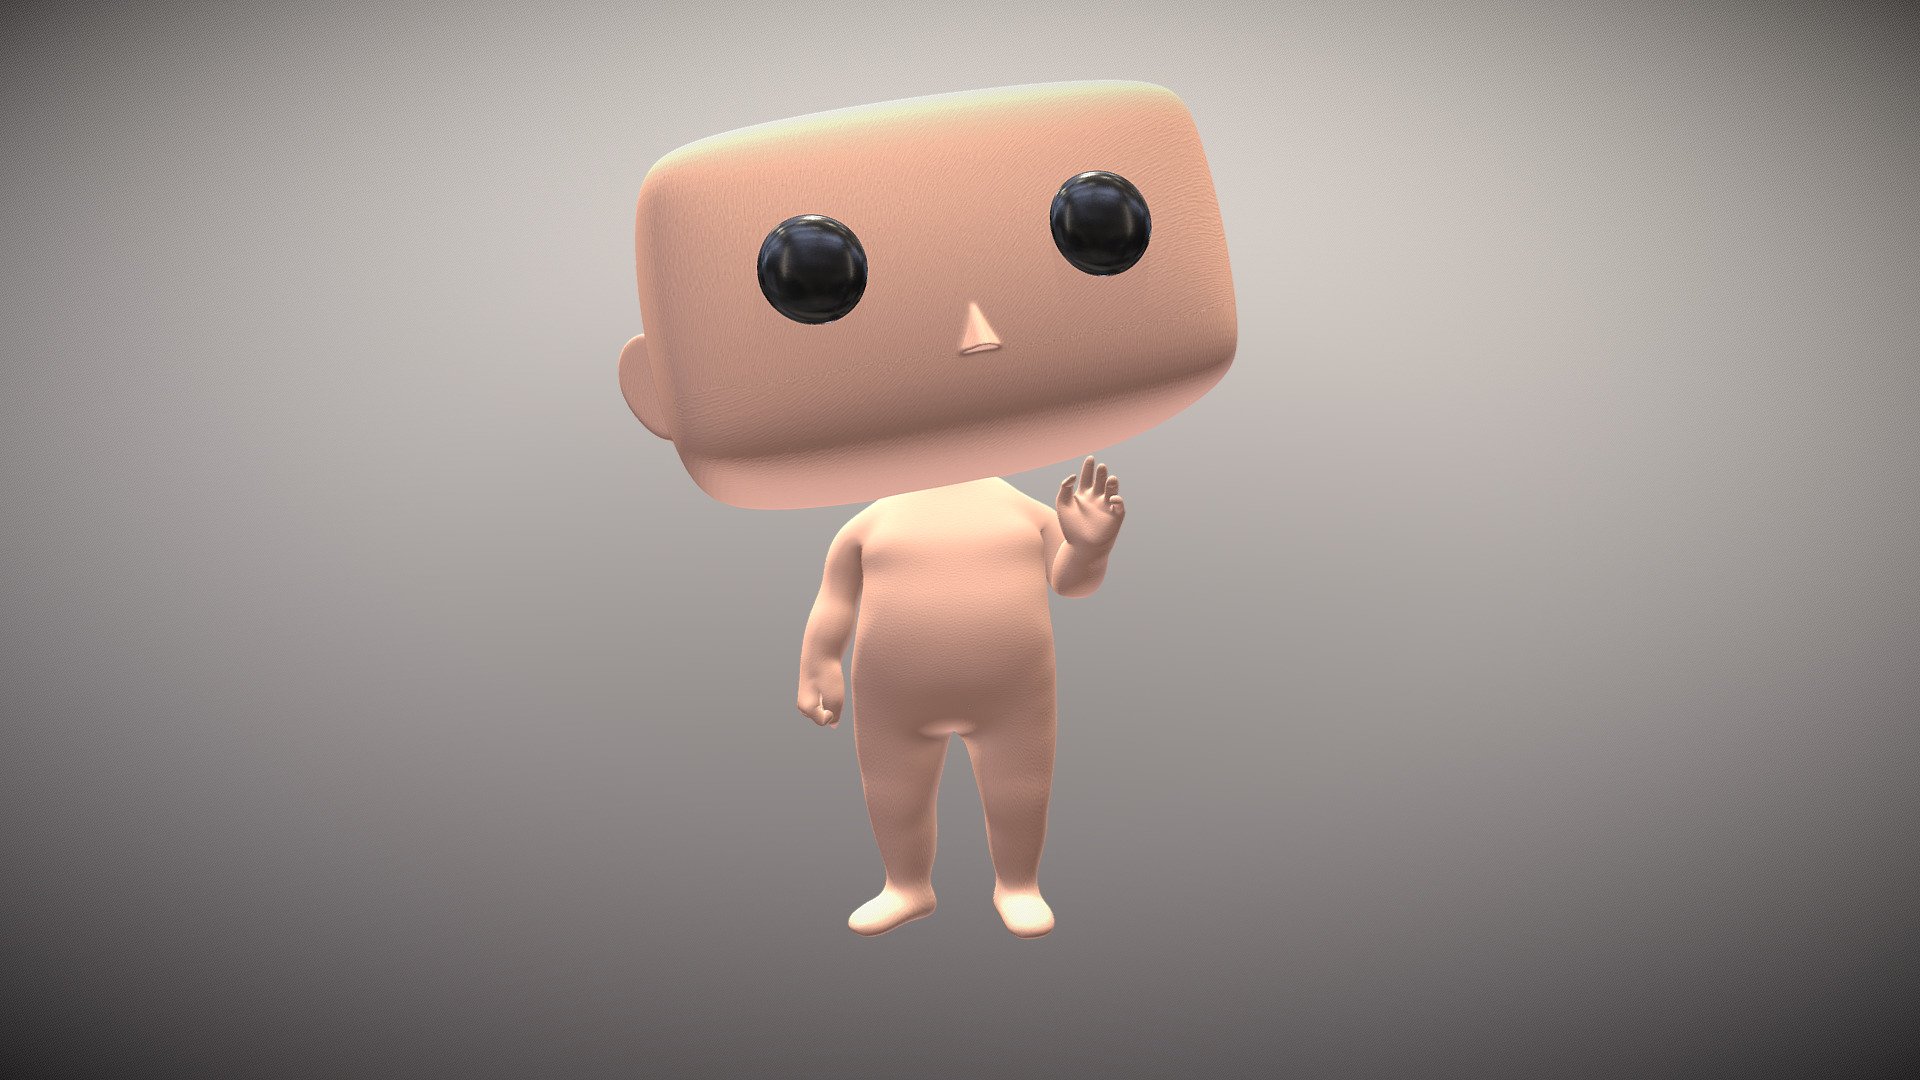 funko-pop-base-rigged-preview-3d-model-by-smisipsd-edfe902-sketchfab